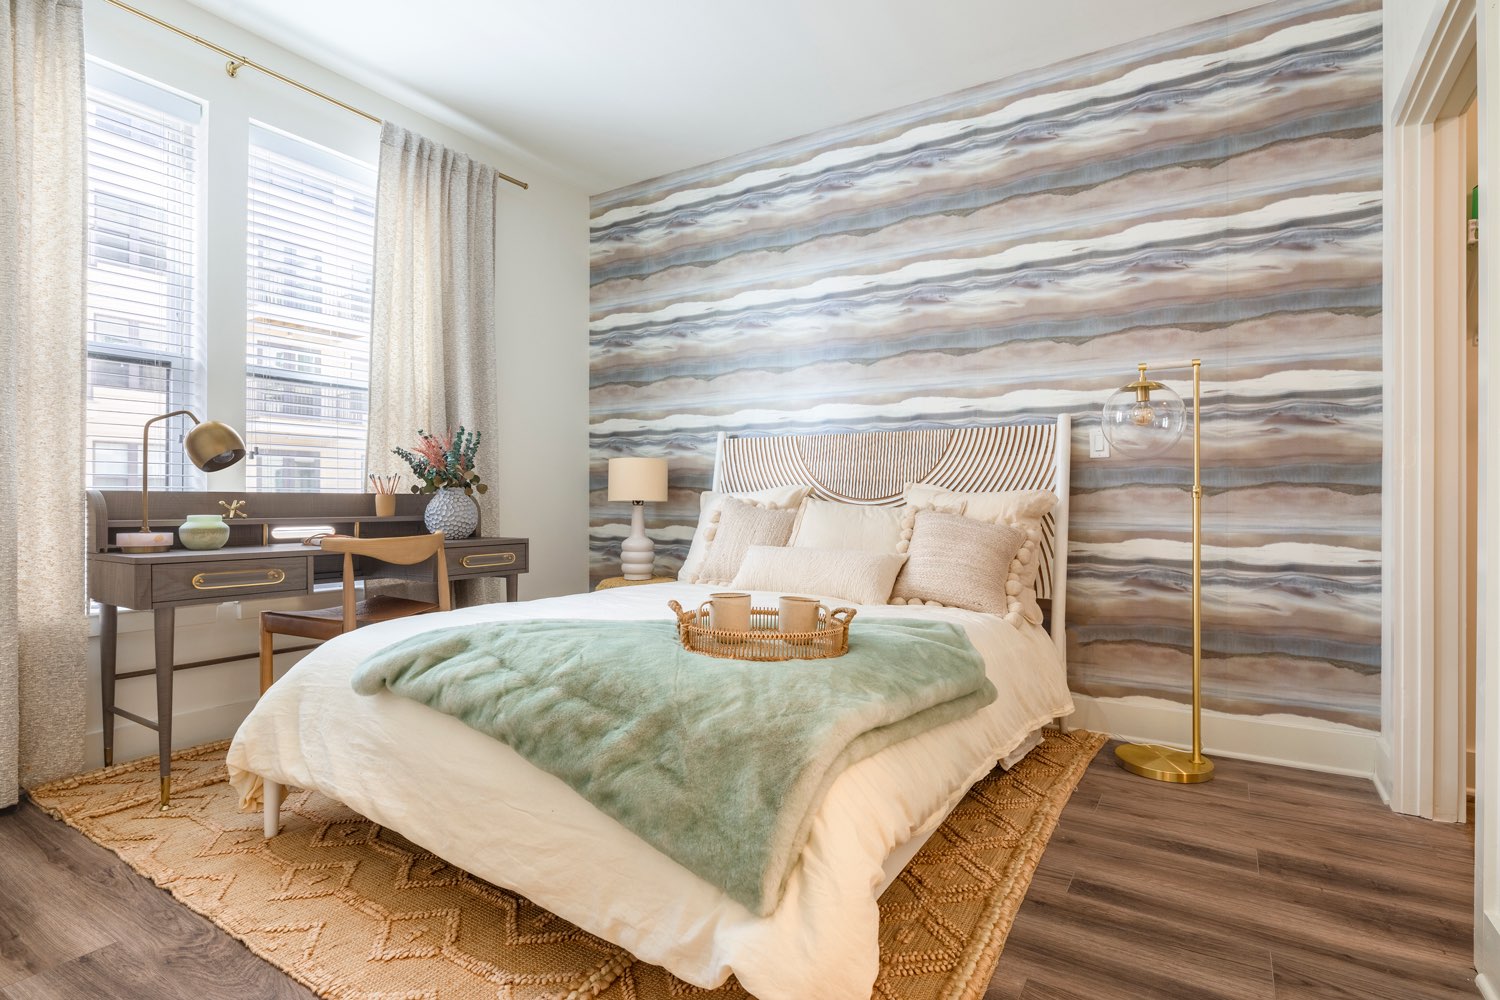 A bedroom with an abstract wallpapered wall.